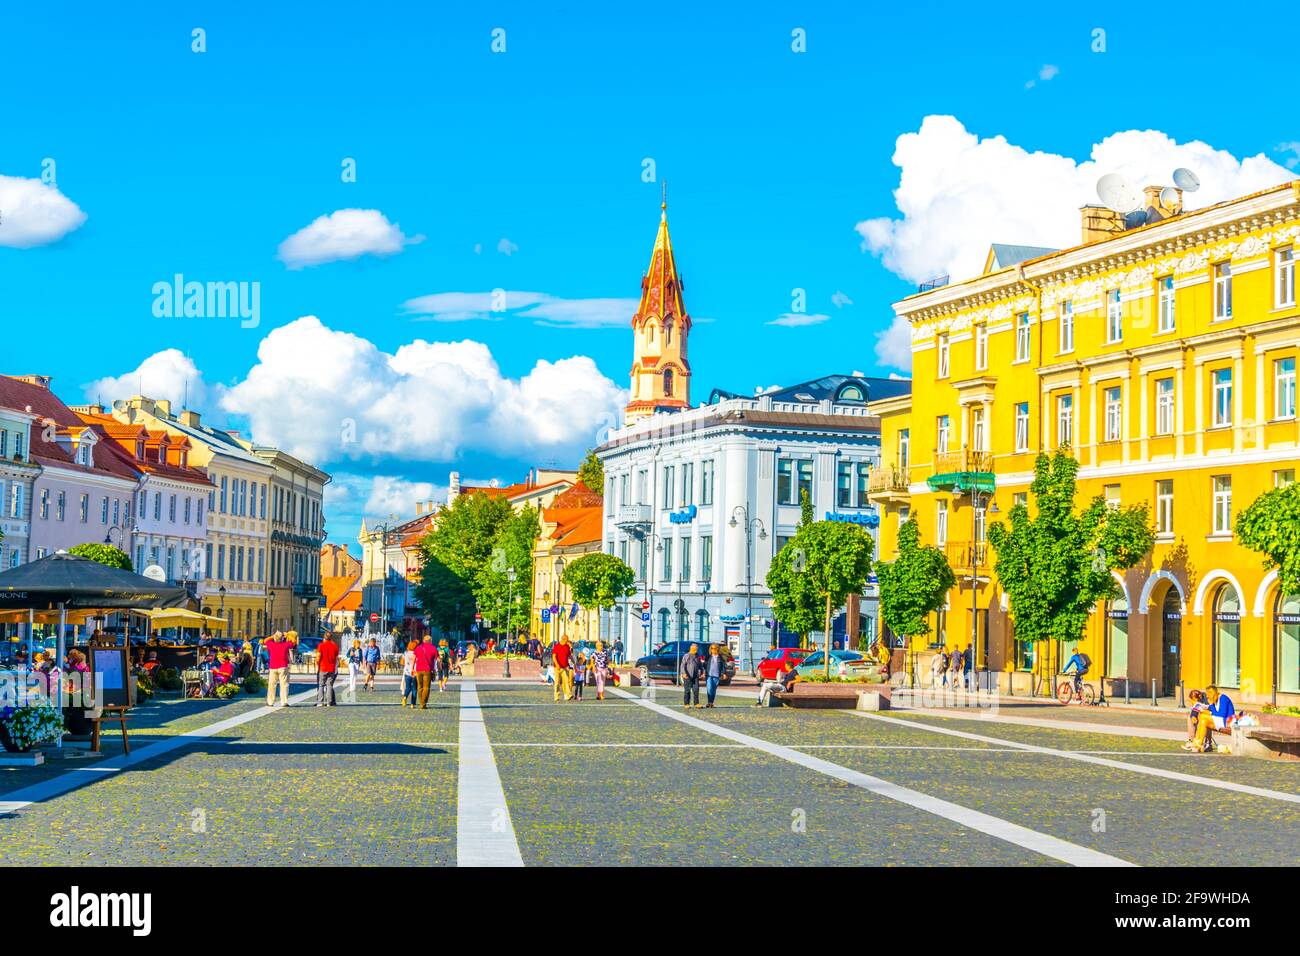 VILNIUS, LITHUANIA, AUGUST 14, 2016: People are strolling through Rotuses aikste - the town hall square of the lithuanian capital Vilnius, Lithuania Stock Photo